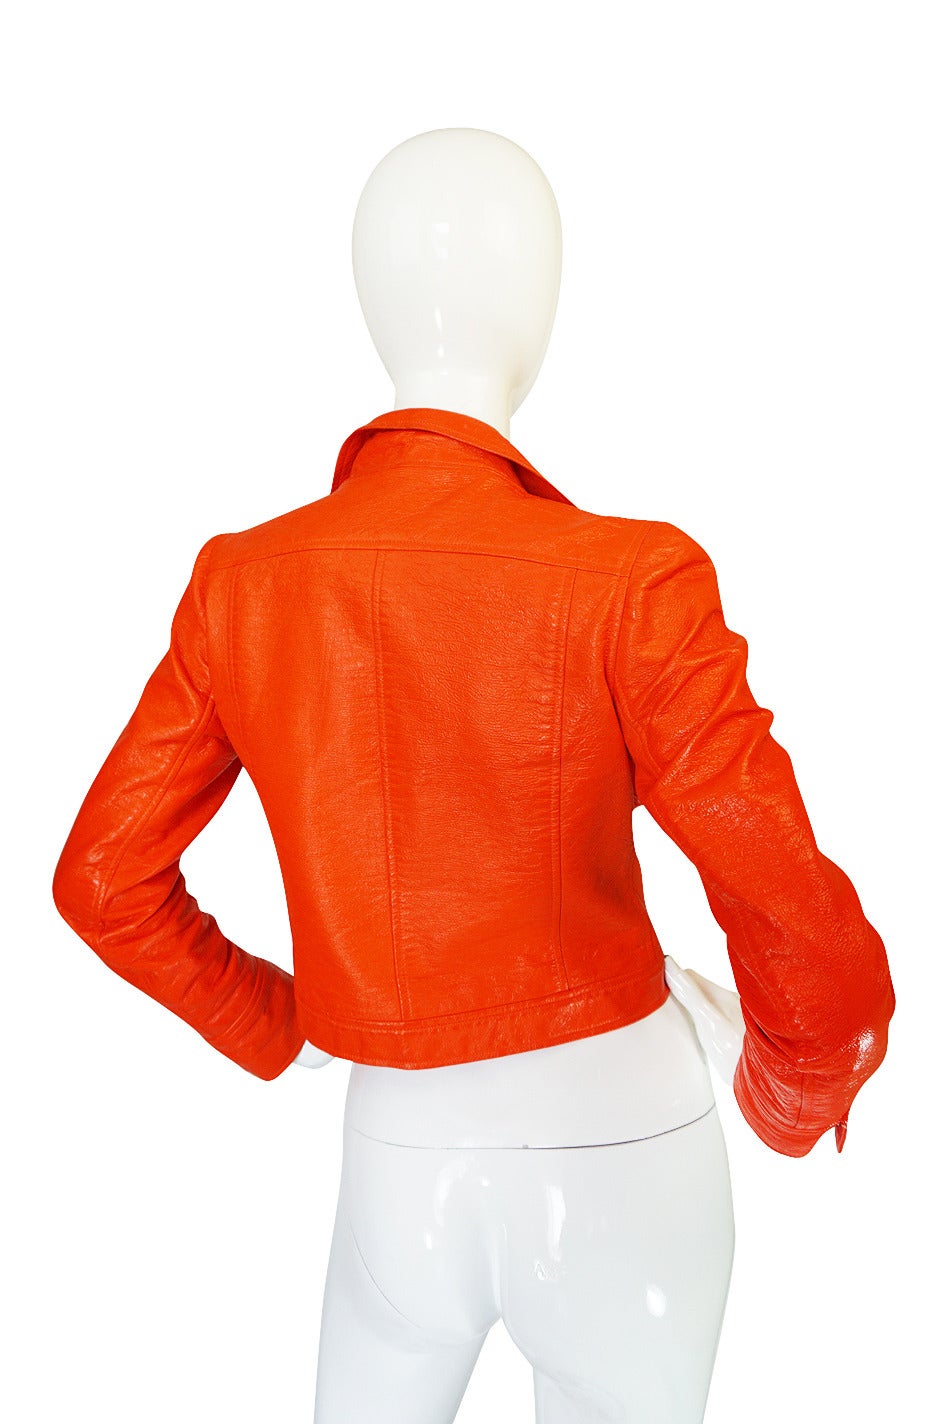 Courreges did these amazing little faux leather jackets made from vinyl in the 1960s and then the company re-issued them in the early 80s. This is one of the much rarer originals in one of the best and most coveted of the colors - the brilliant